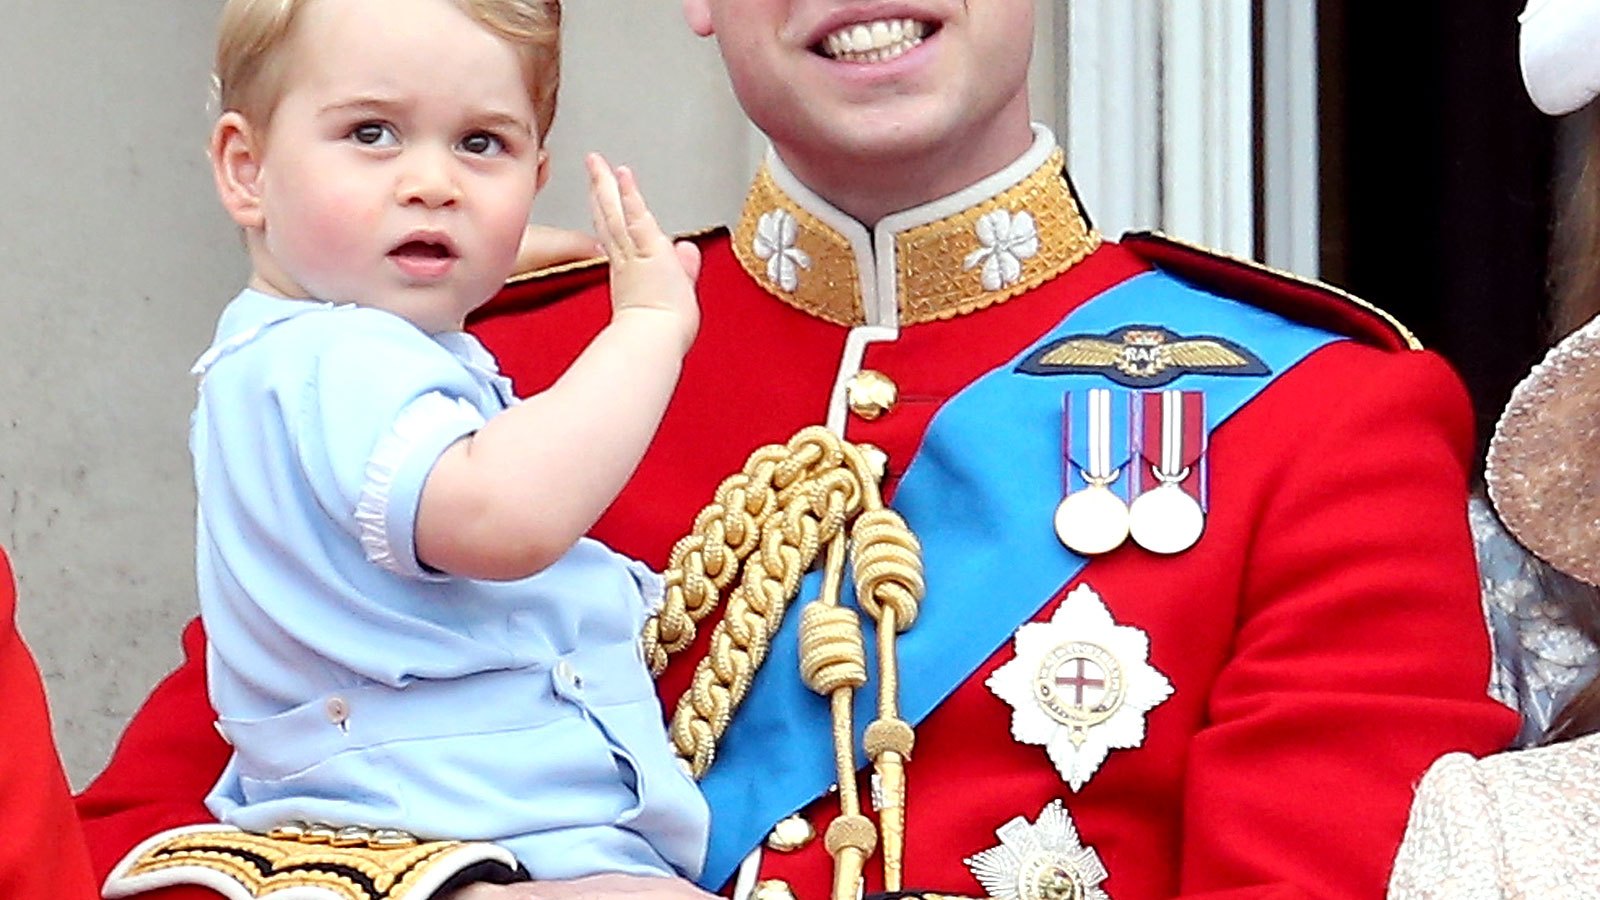 Prince George and Prince William during the Trooping the Colour